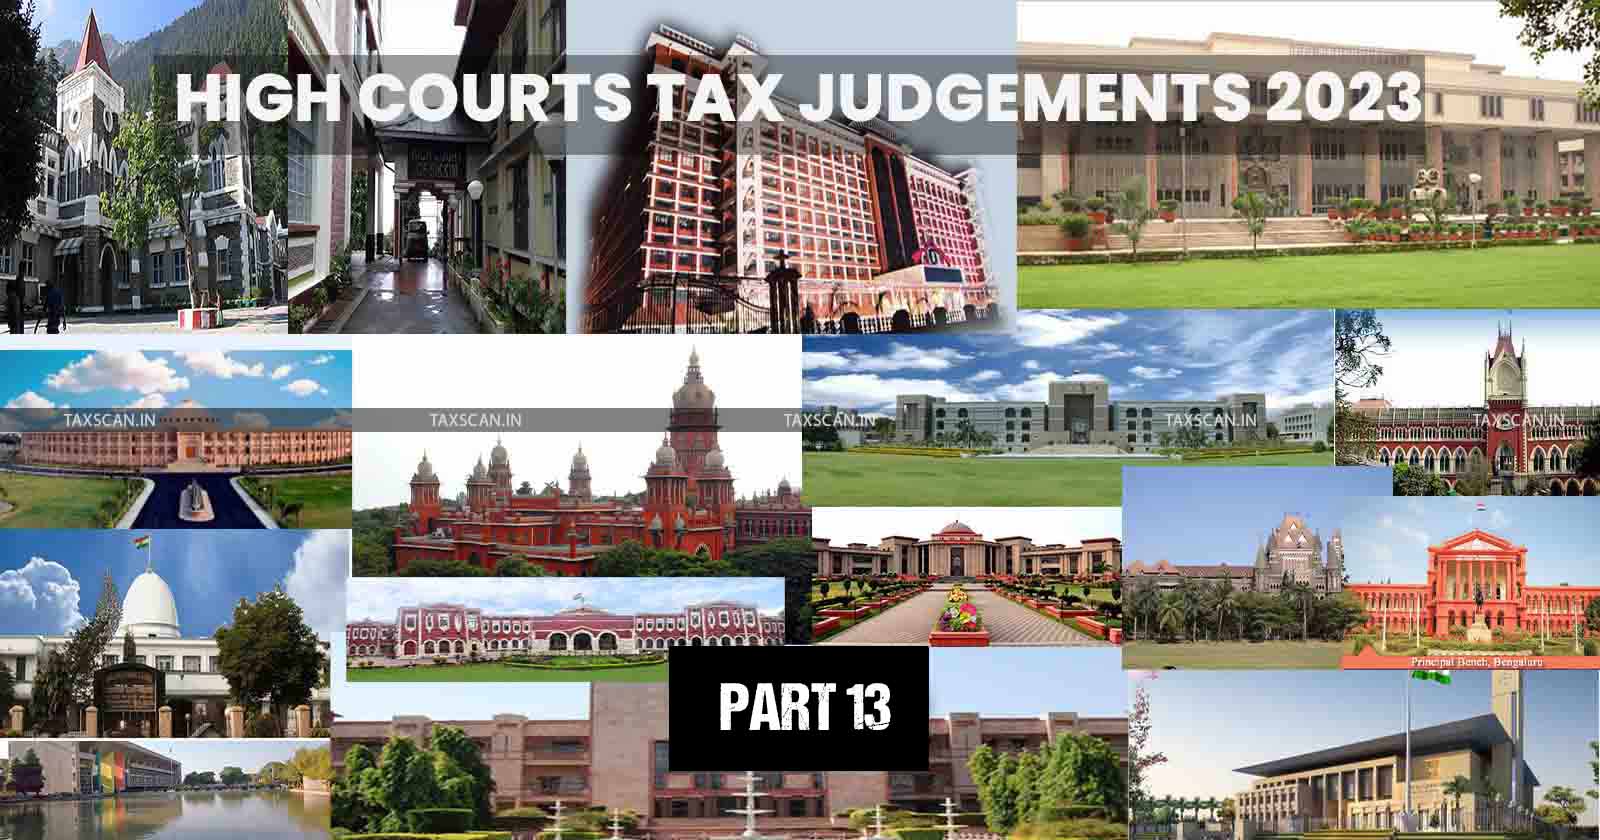 Tax Judgments - High Courts Annual Digest 2023 - part - 13 taxscan